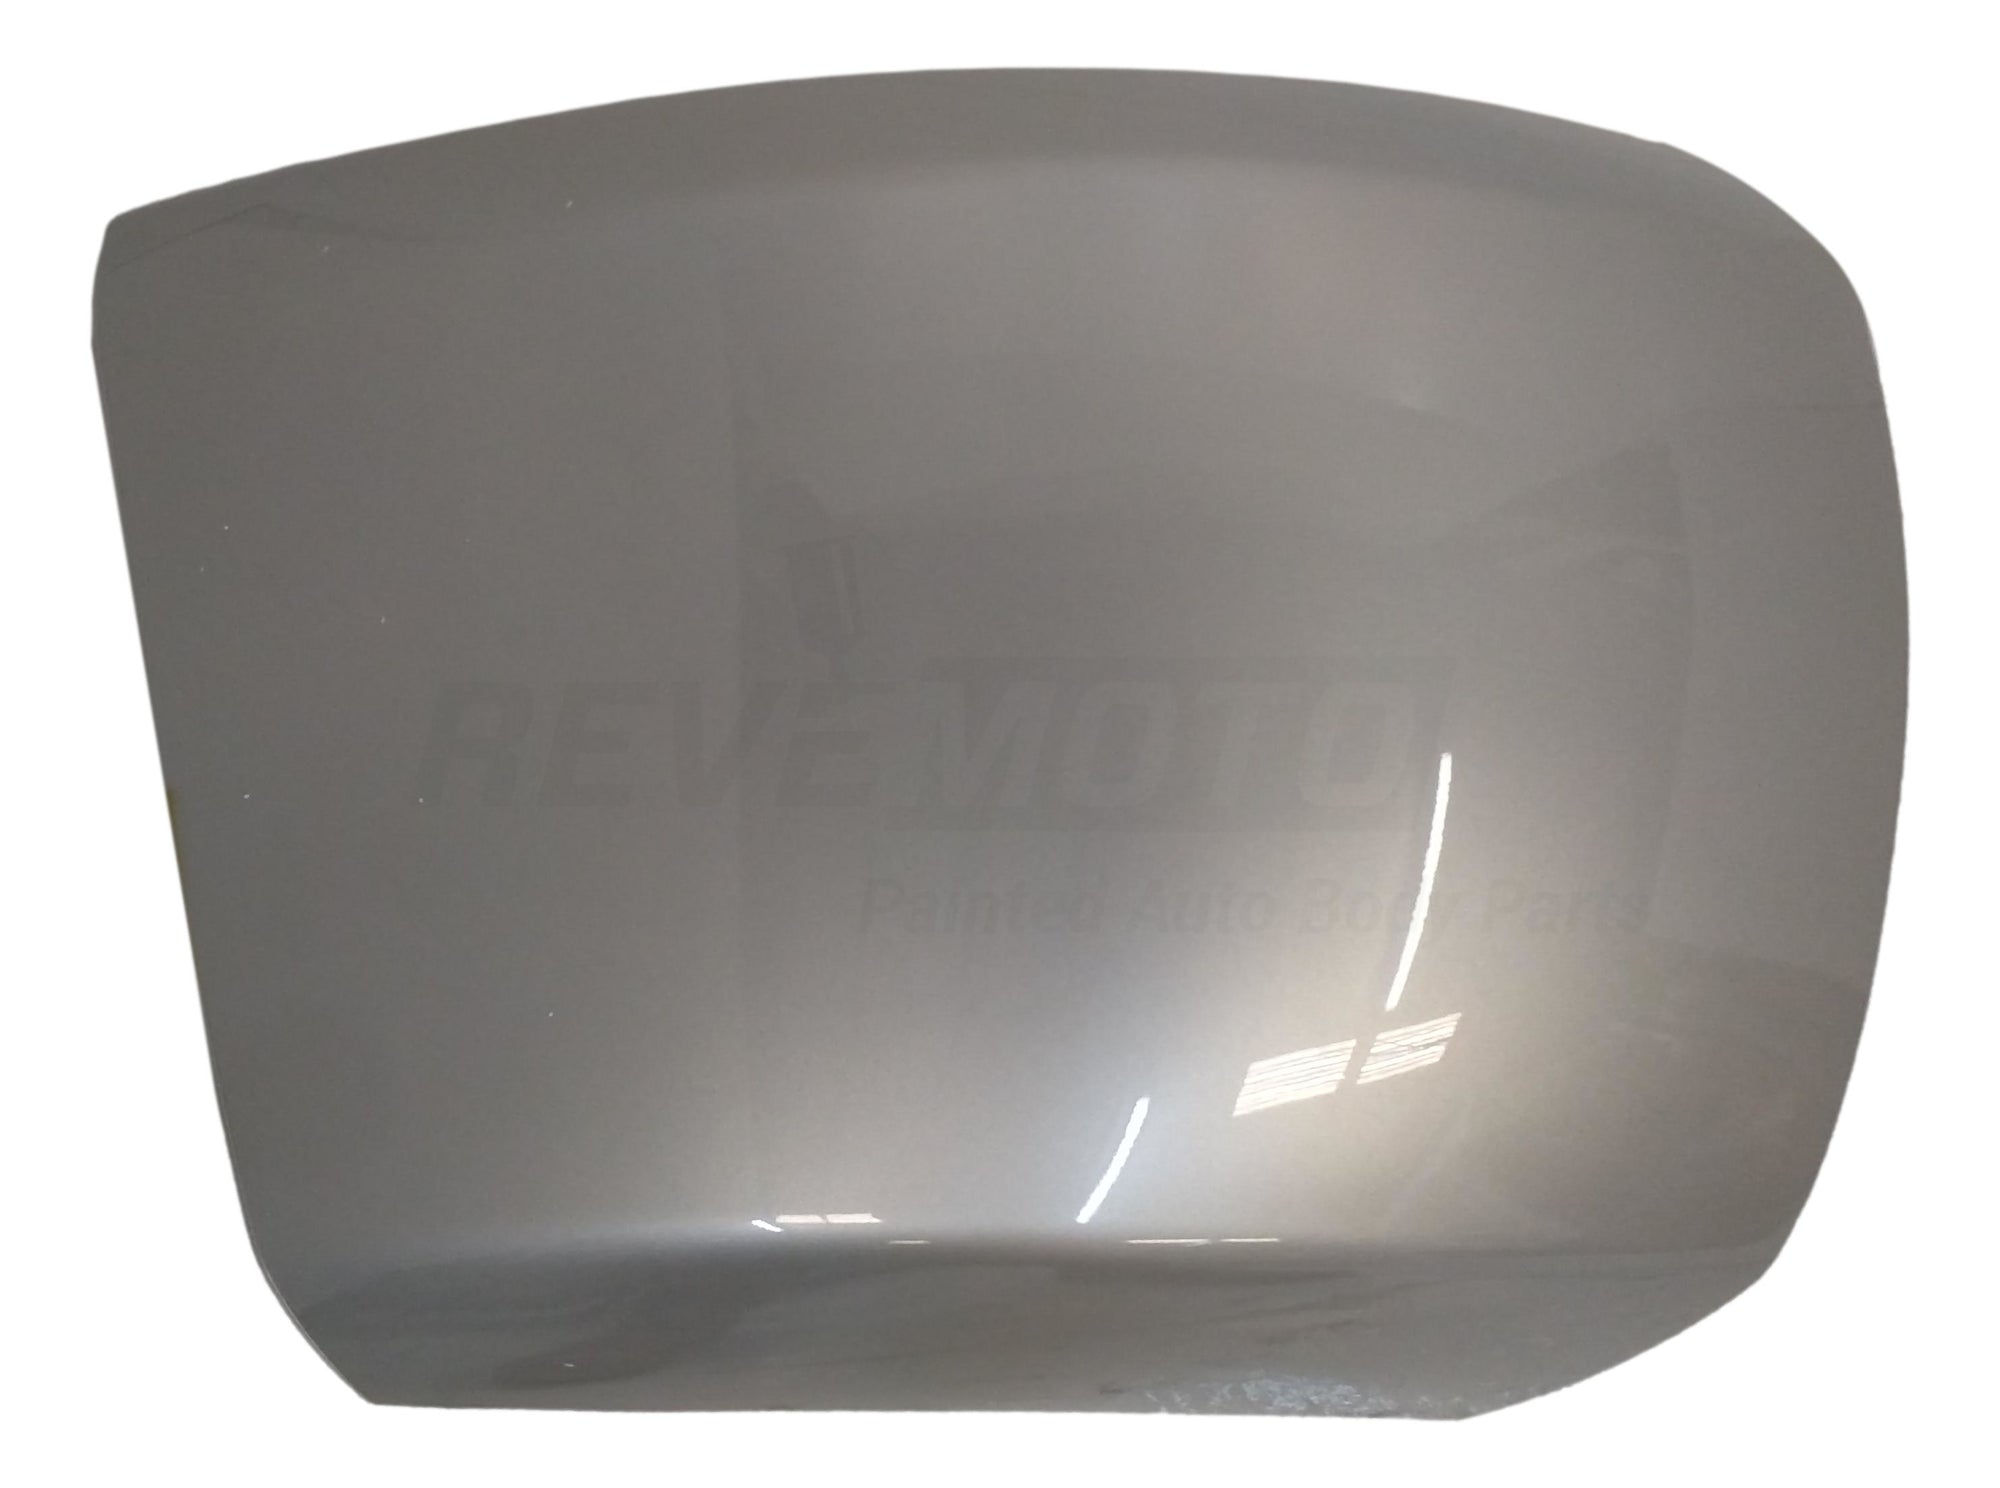 2011 Chevrolet Silverado Front Bumper End Painted Sheer Silver Metallic (WA726S), Without Foglights, Passenger-Side